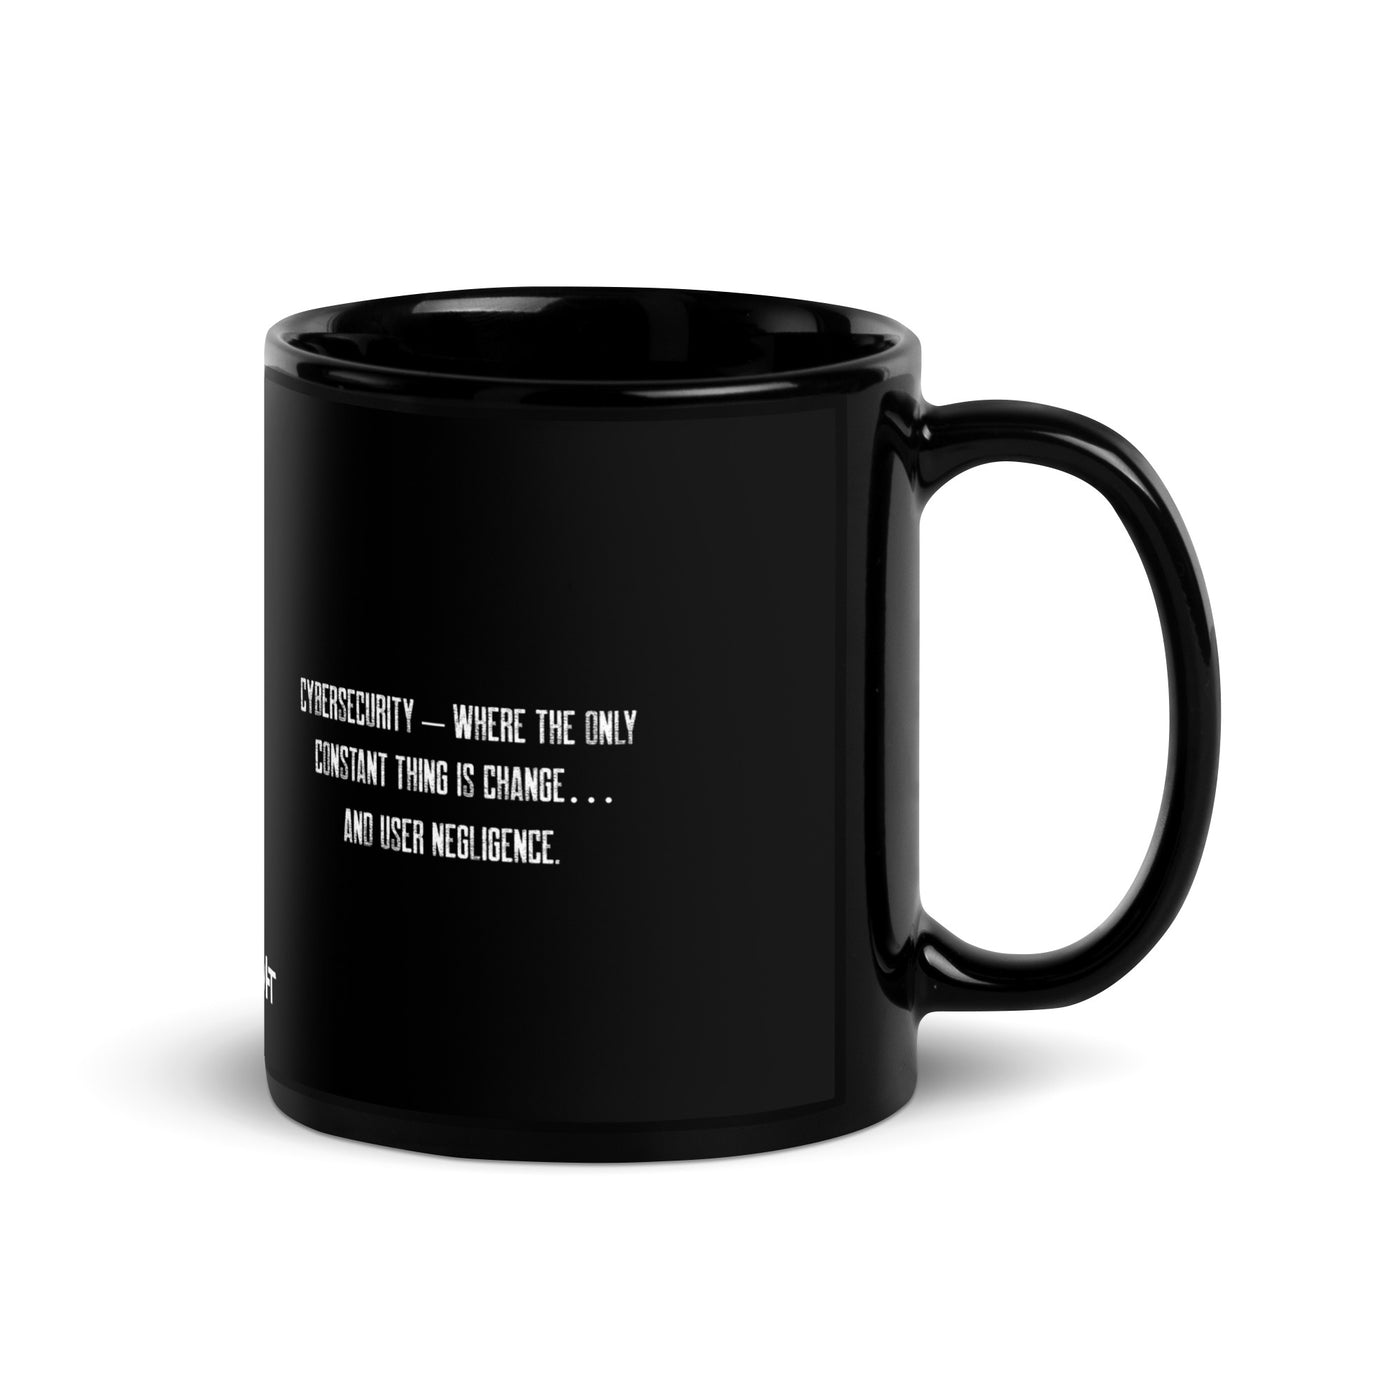 Cybersecurity where the only constant thing is change and user negligence - Black Glossy Mug